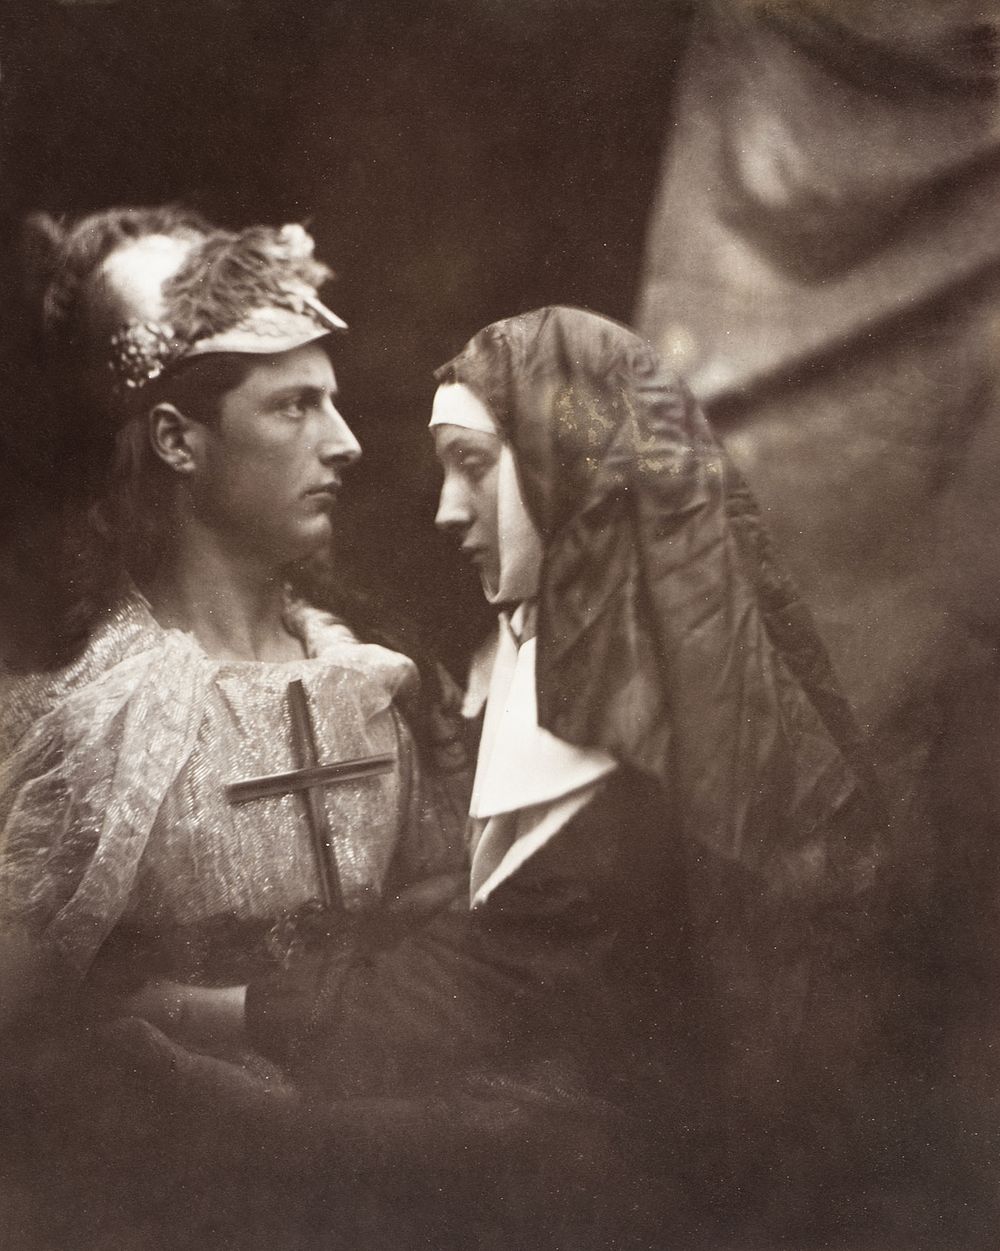 Sir Galahad and the pale nun (19th century) vintage print by Julia Margaret Cameron. Original public domain image from The…